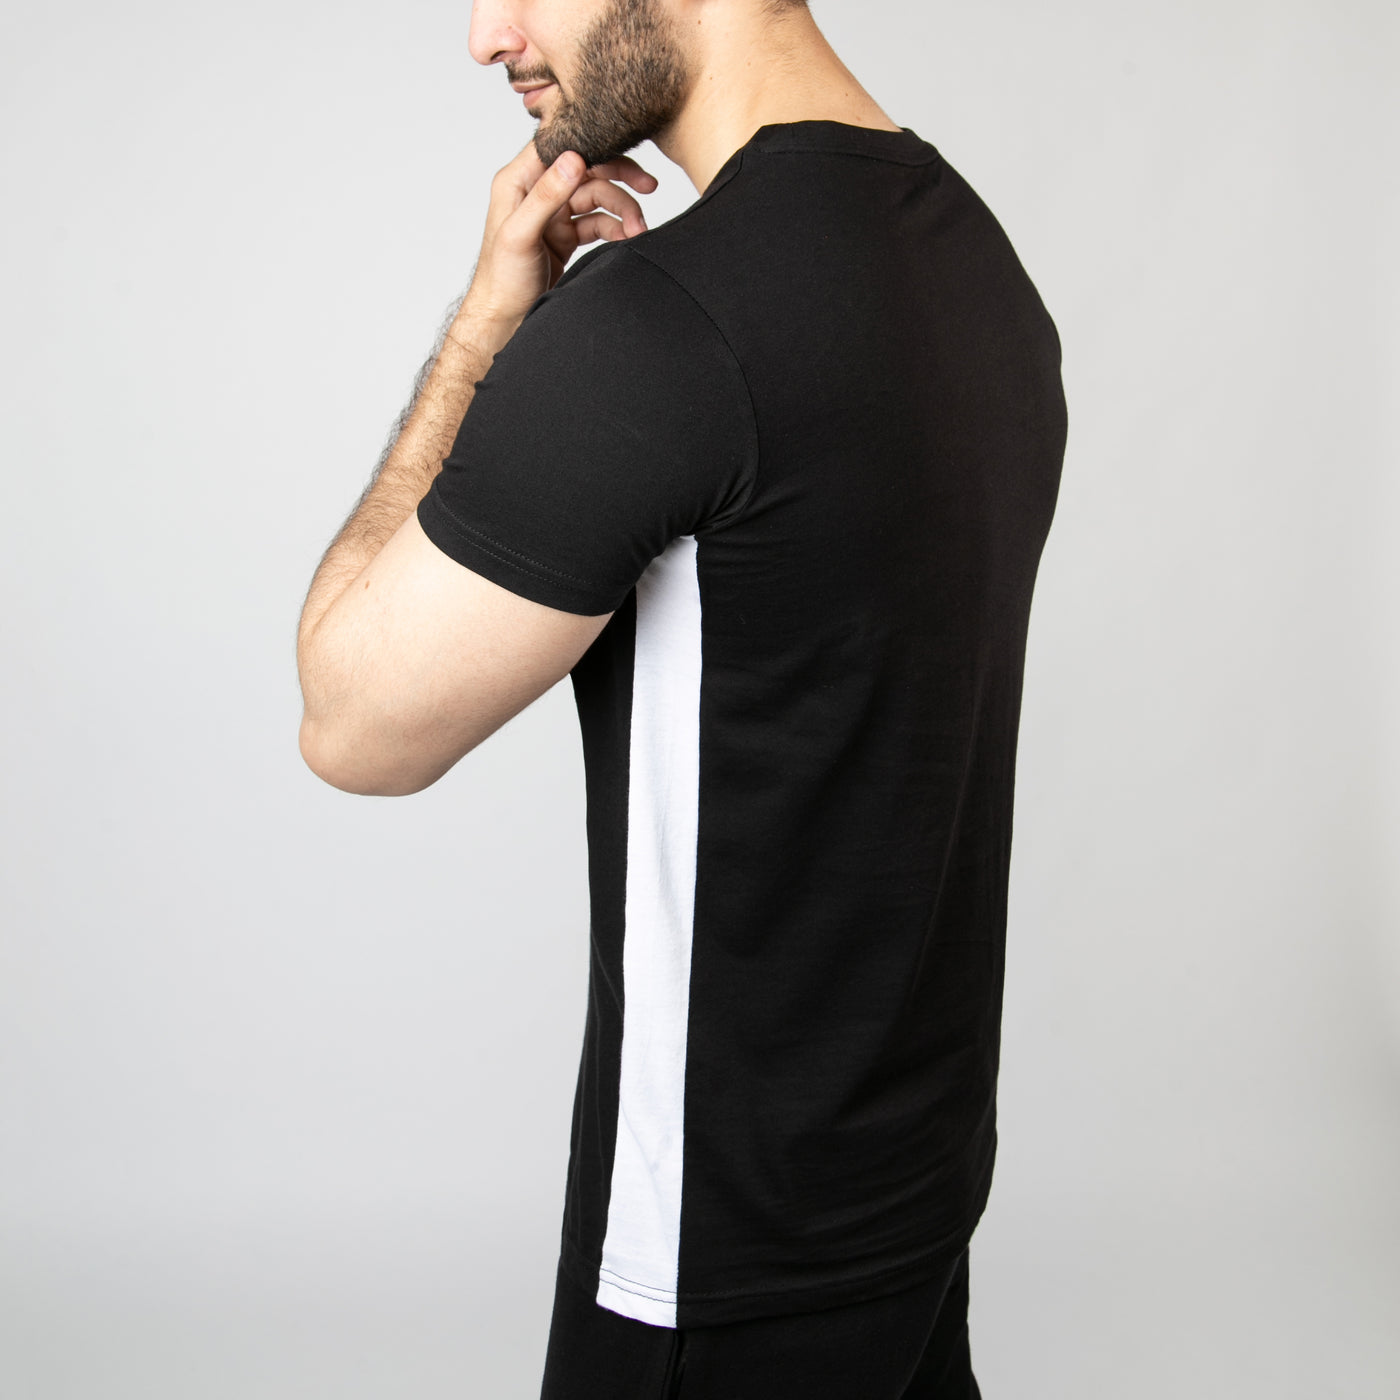 Black T-Shirt With White Side Panels